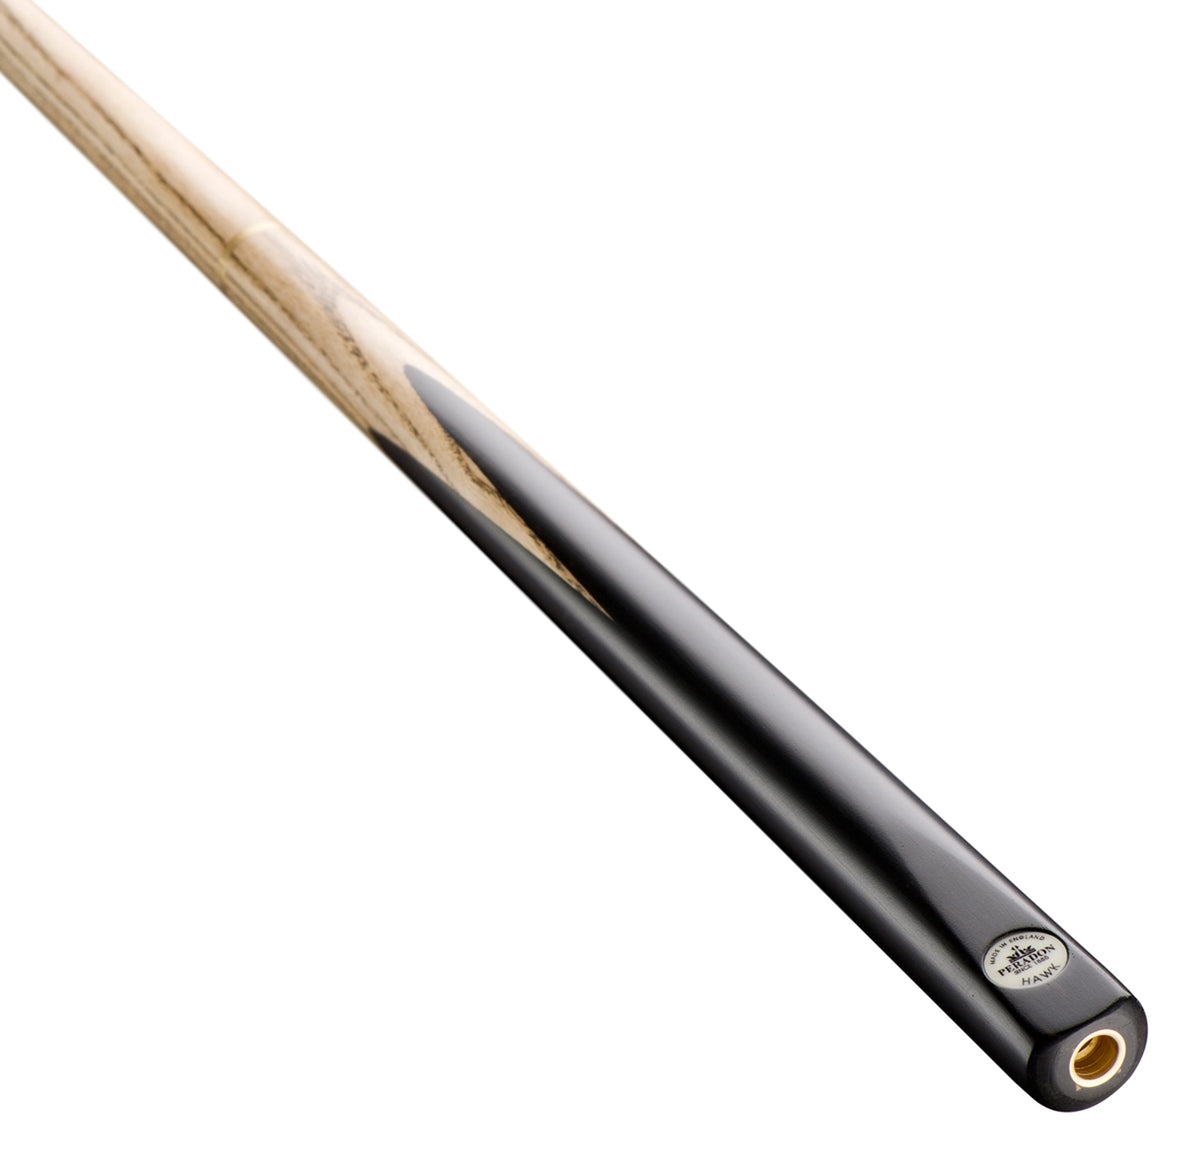 Peradon Hawk 3/4 Jointed 8 Ball Pool Cue. On angle view